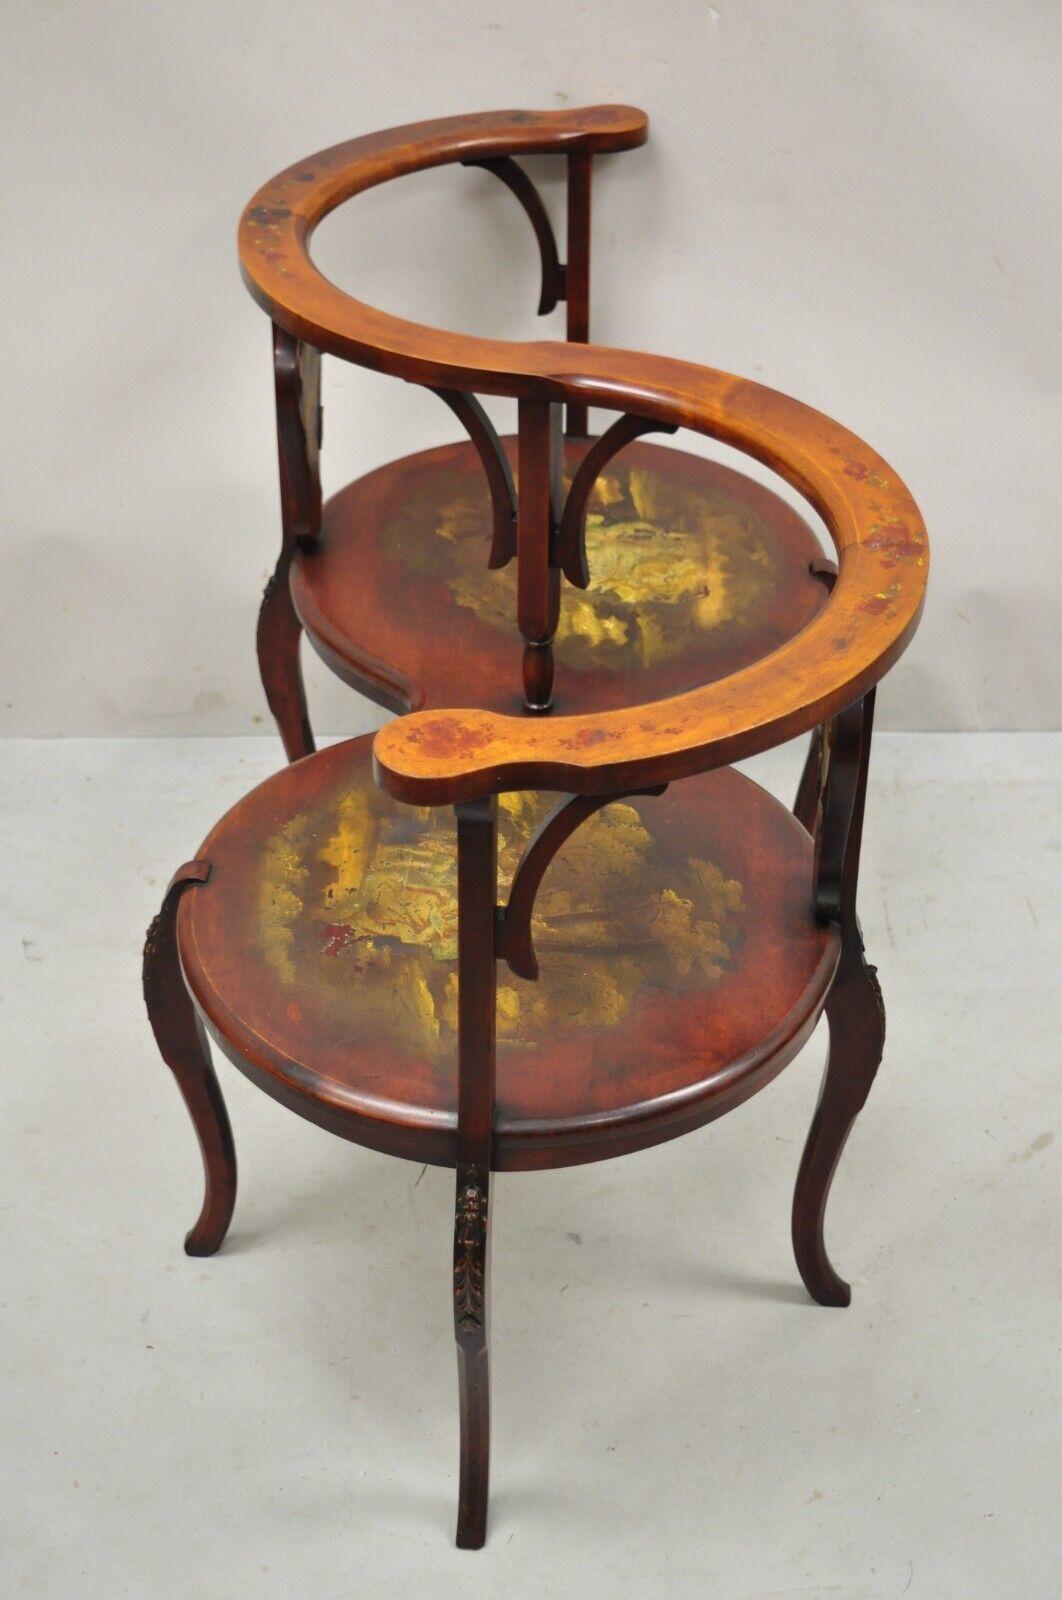 Antique Victorian Mahogany hand painted Tete a Tete 2 seat bench. Item features hand painted scenes, twin seats, applied carvings, cabriole legs, very nice antique item, great style and form. Circa 1900. Measurements: 28.5